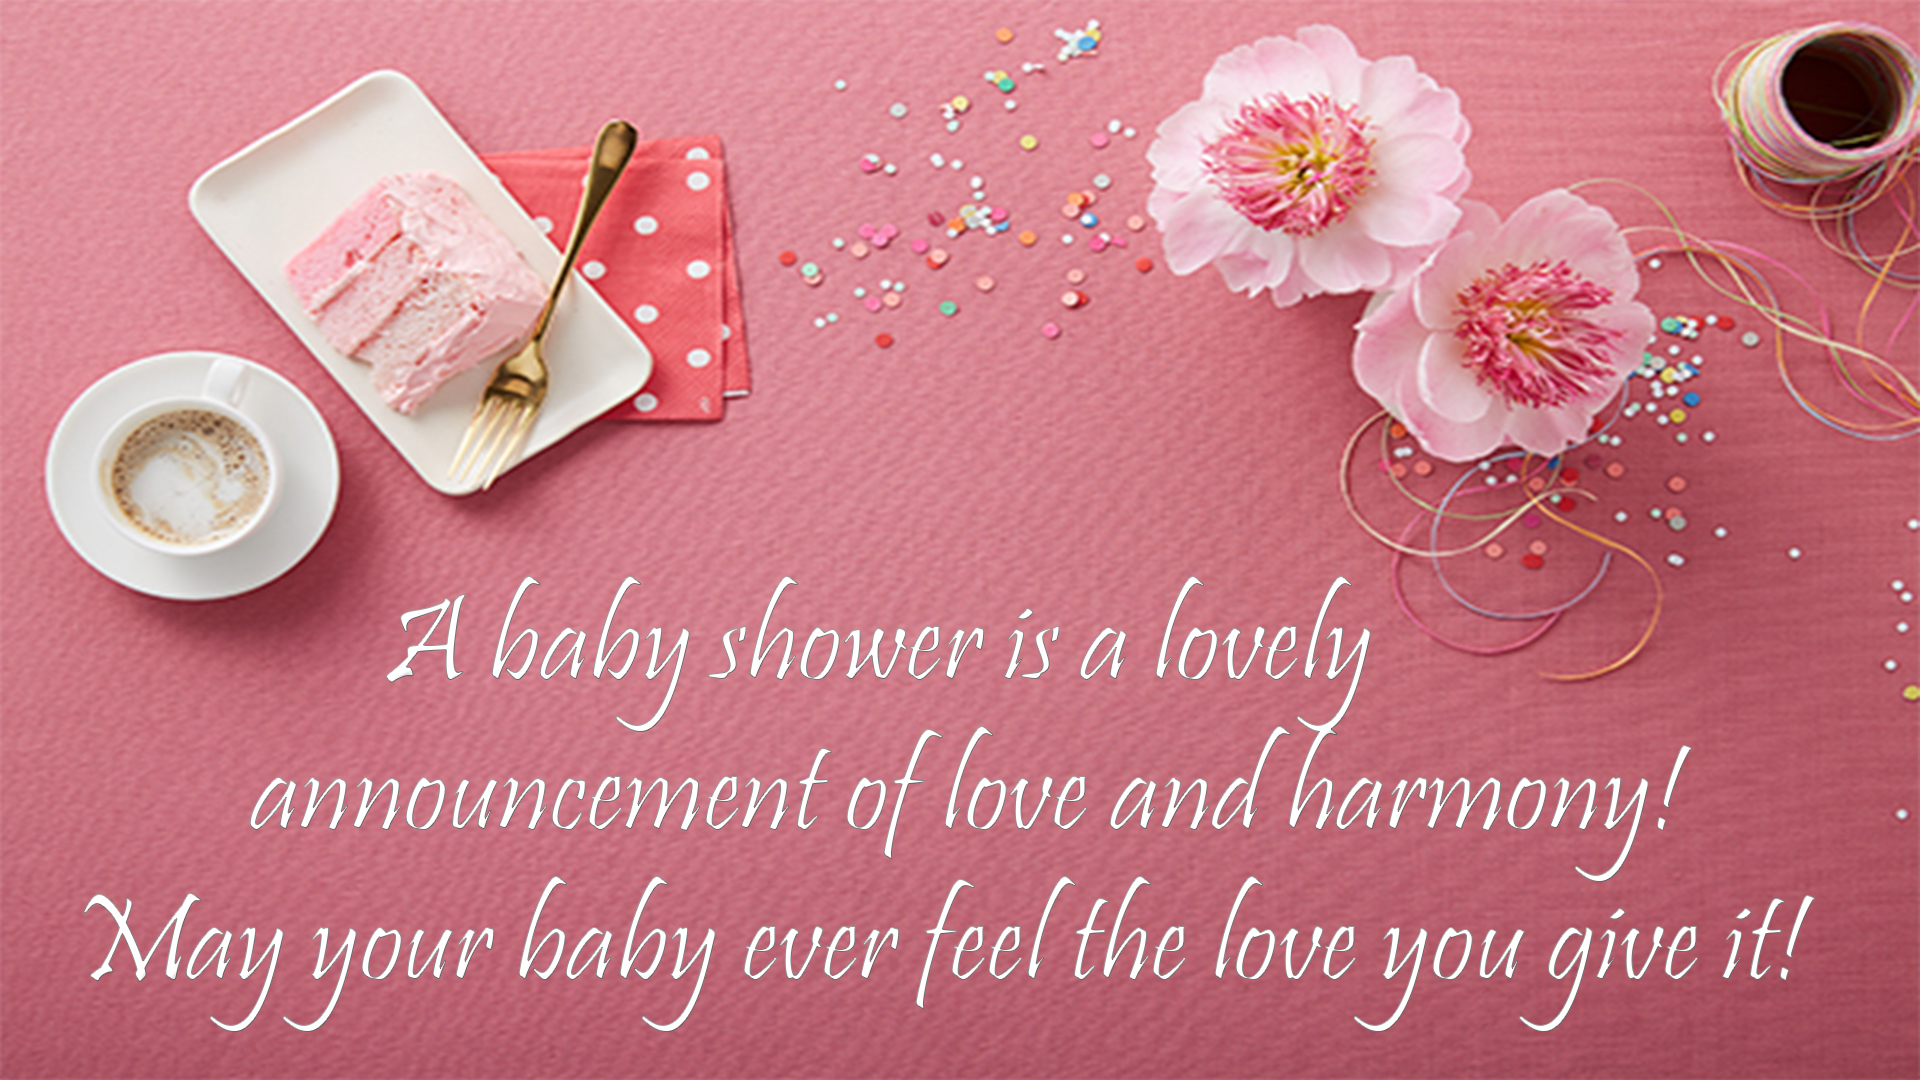 baby shower wishes image